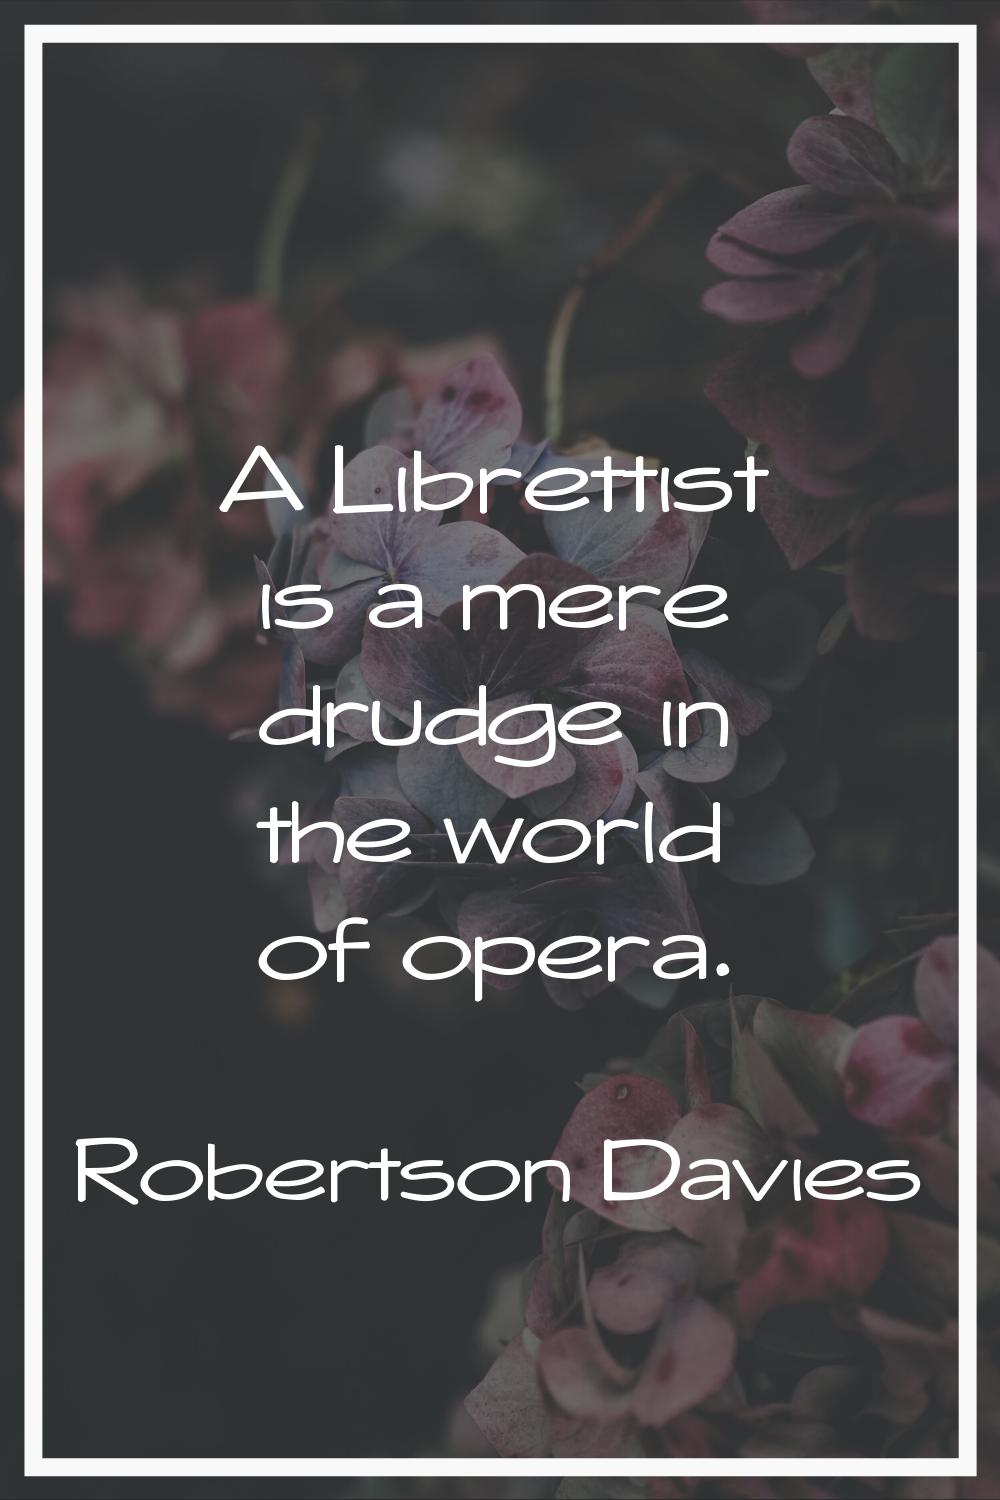 A Librettist is a mere drudge in the world of opera.